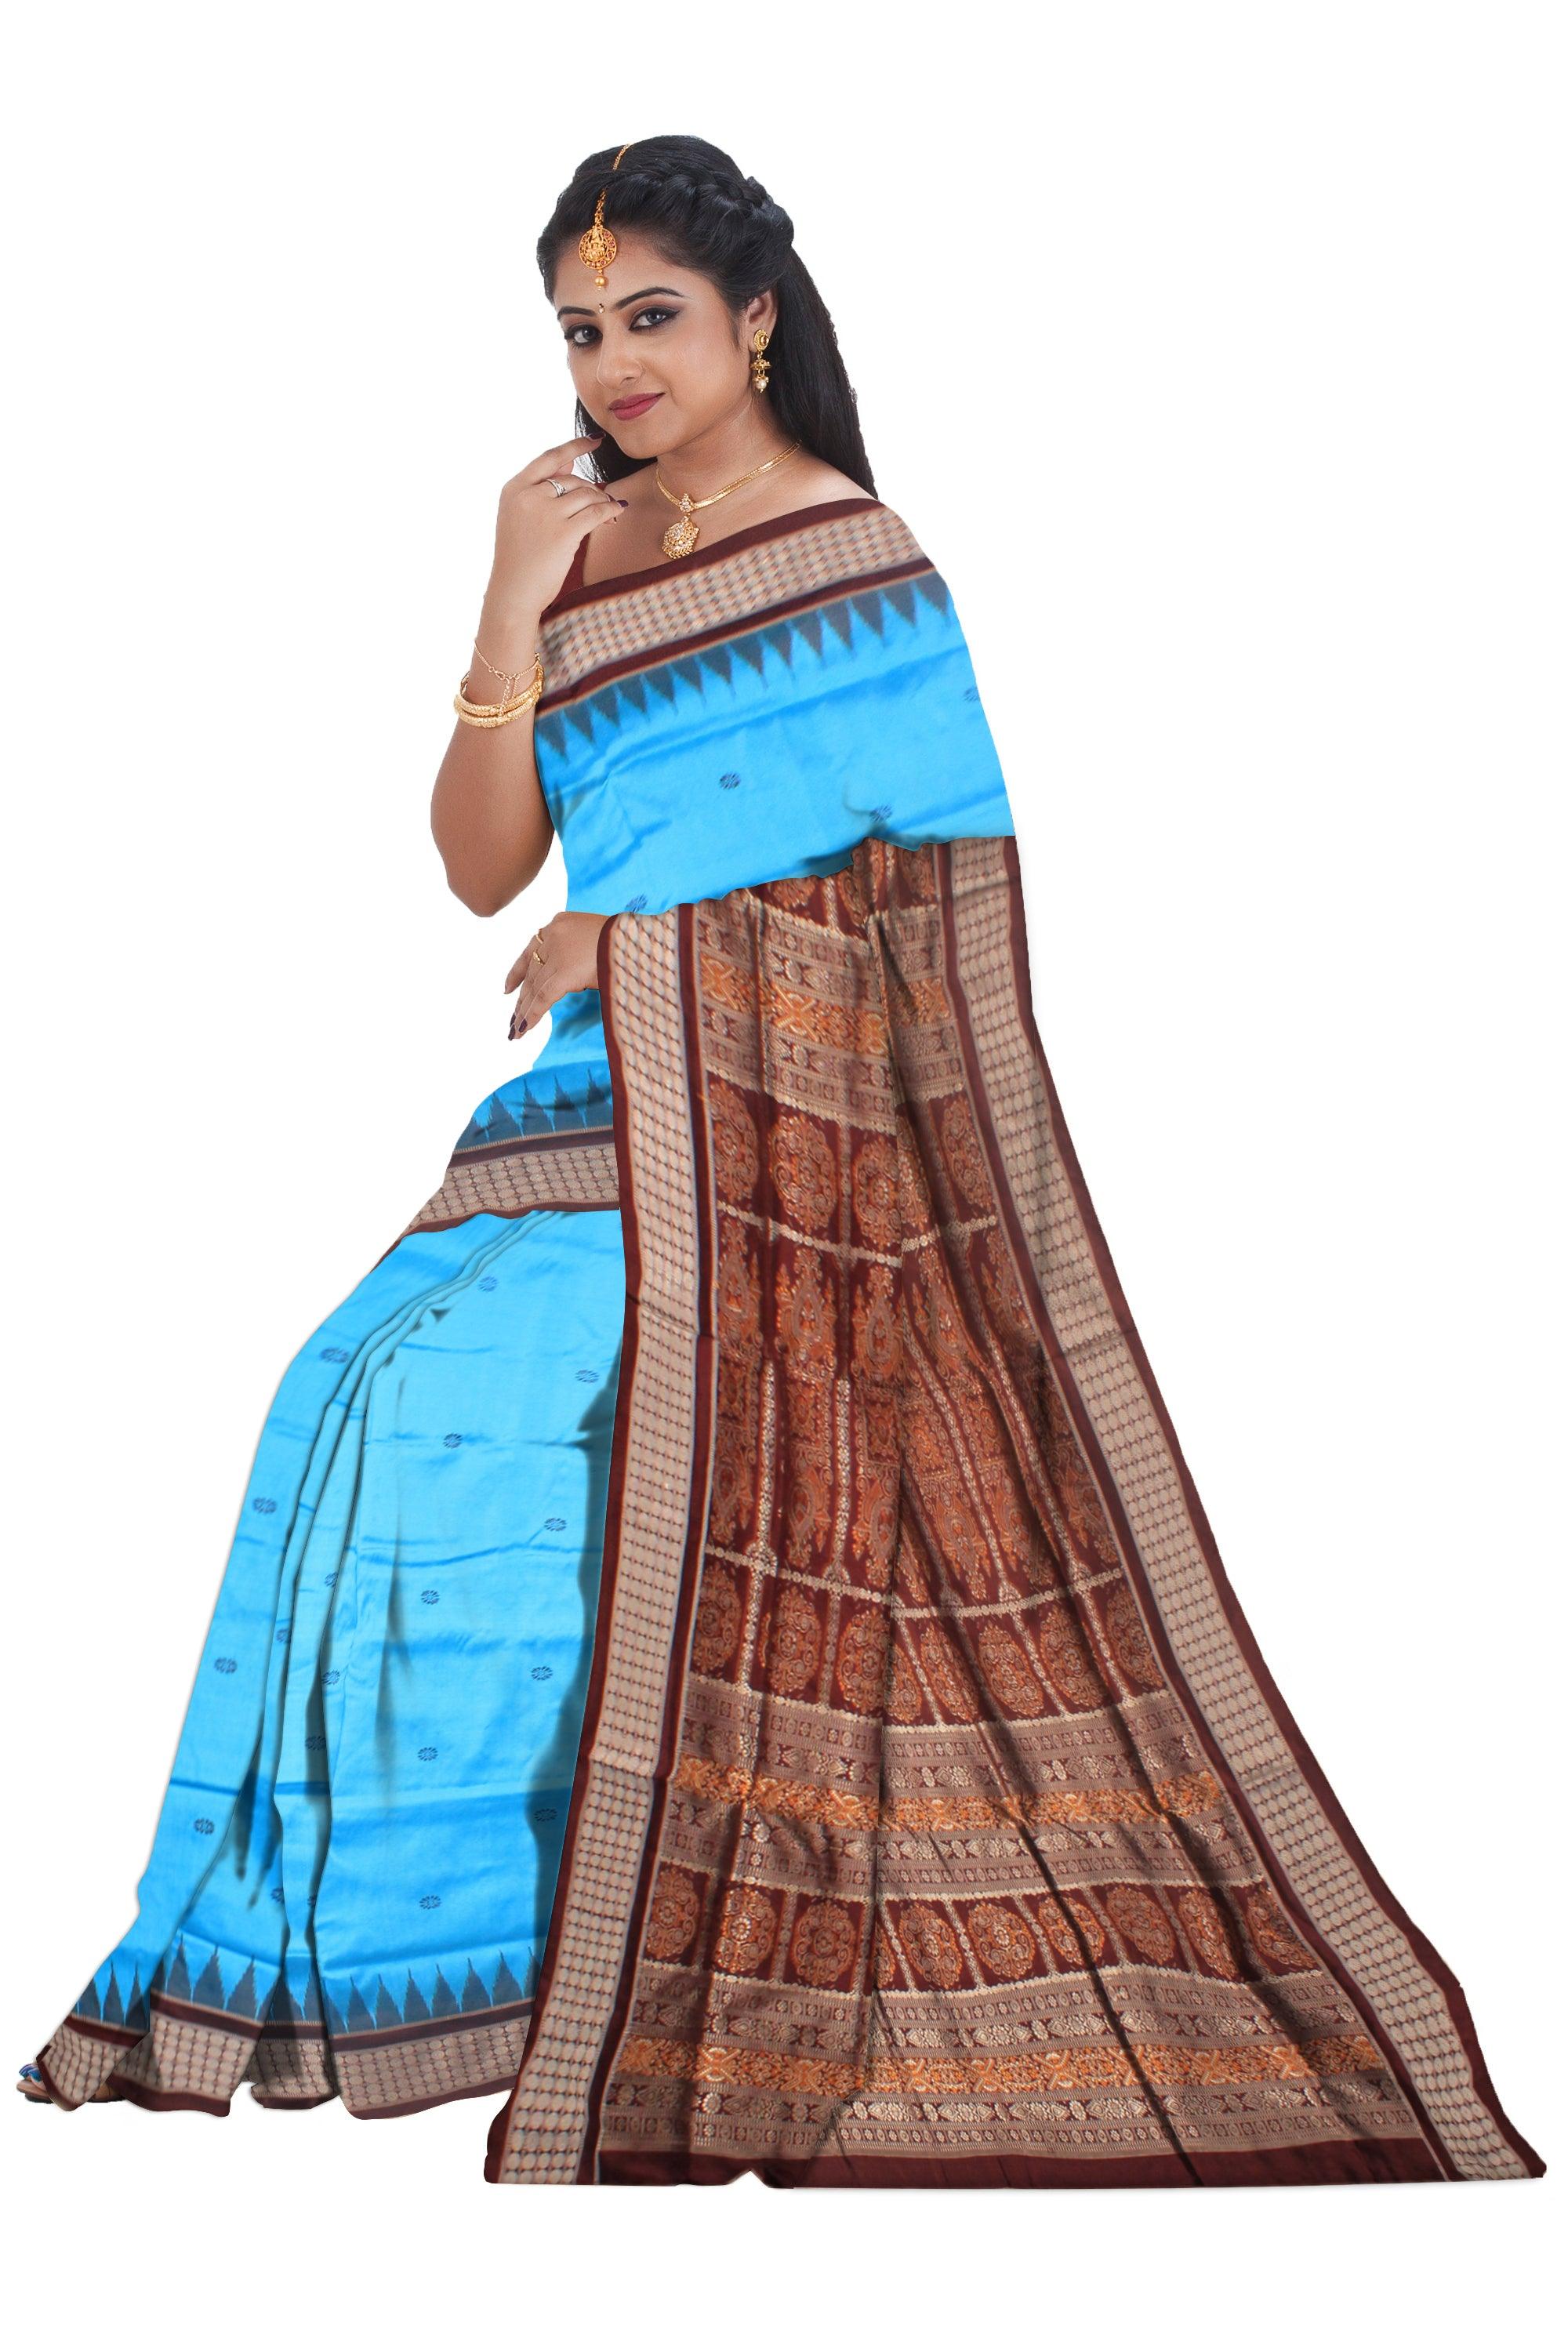 SKY AND COFFEE COLOR BOOTY PATTERN SONEPUR PATA SAREE, WITH BLOUSE PIECE. - Koshali Arts & Crafts Enterprise